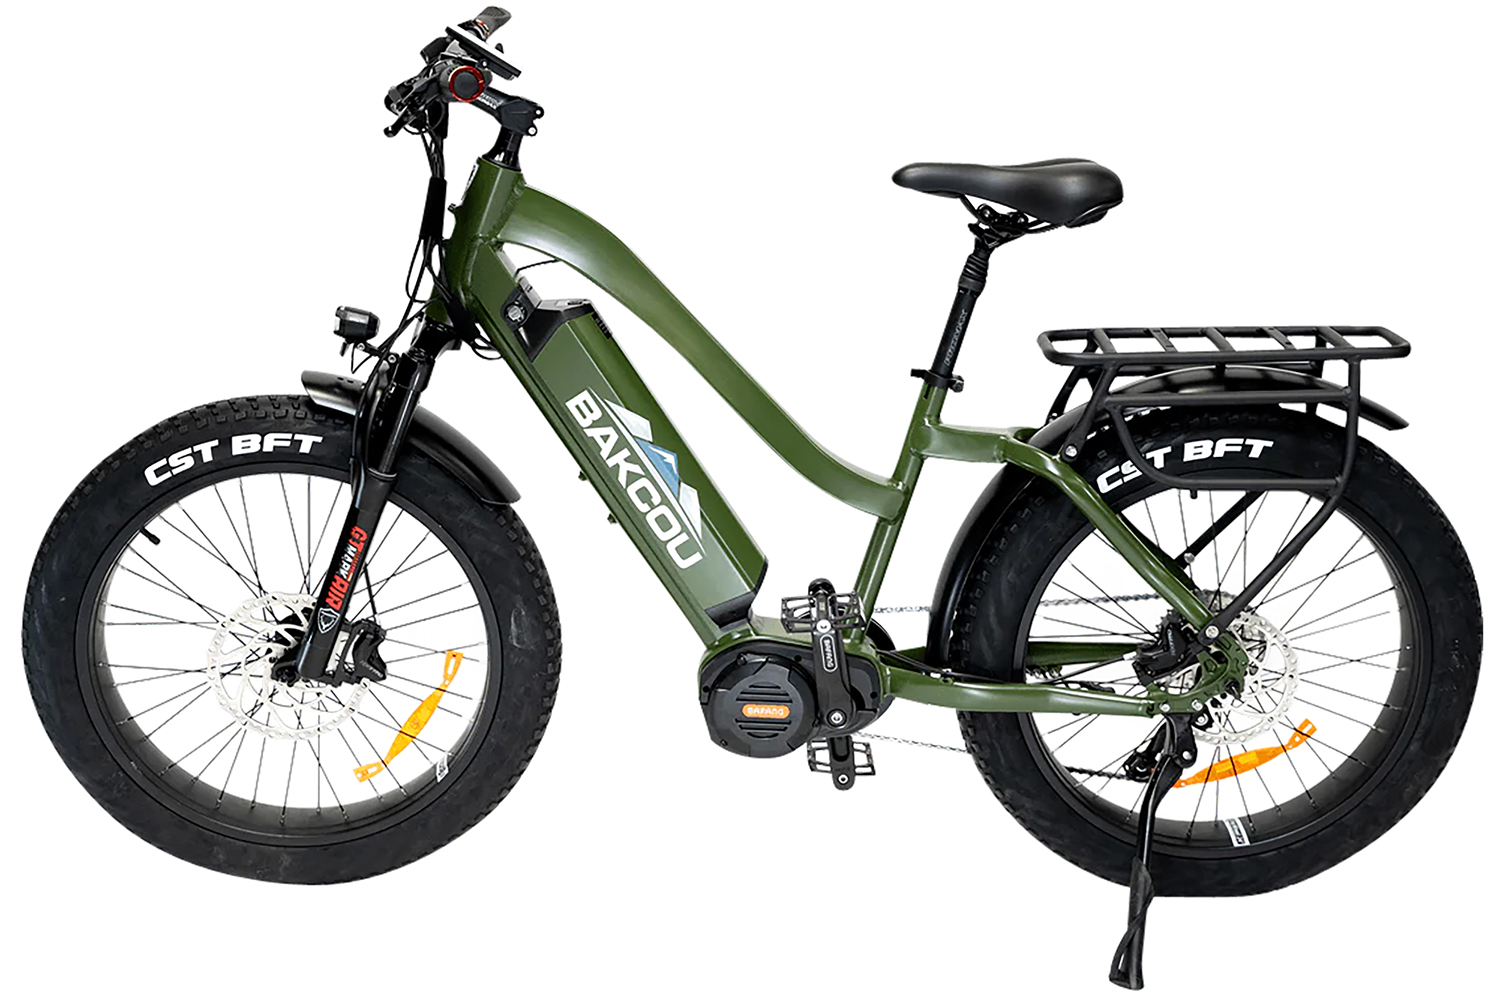 Bakcou E-bikes B-Mst24-G-B21 Mule St 24 Matte Army Green 18" W/Stand Over Height Of 29.50" Frame, Shimano Alivio Hill-Cl